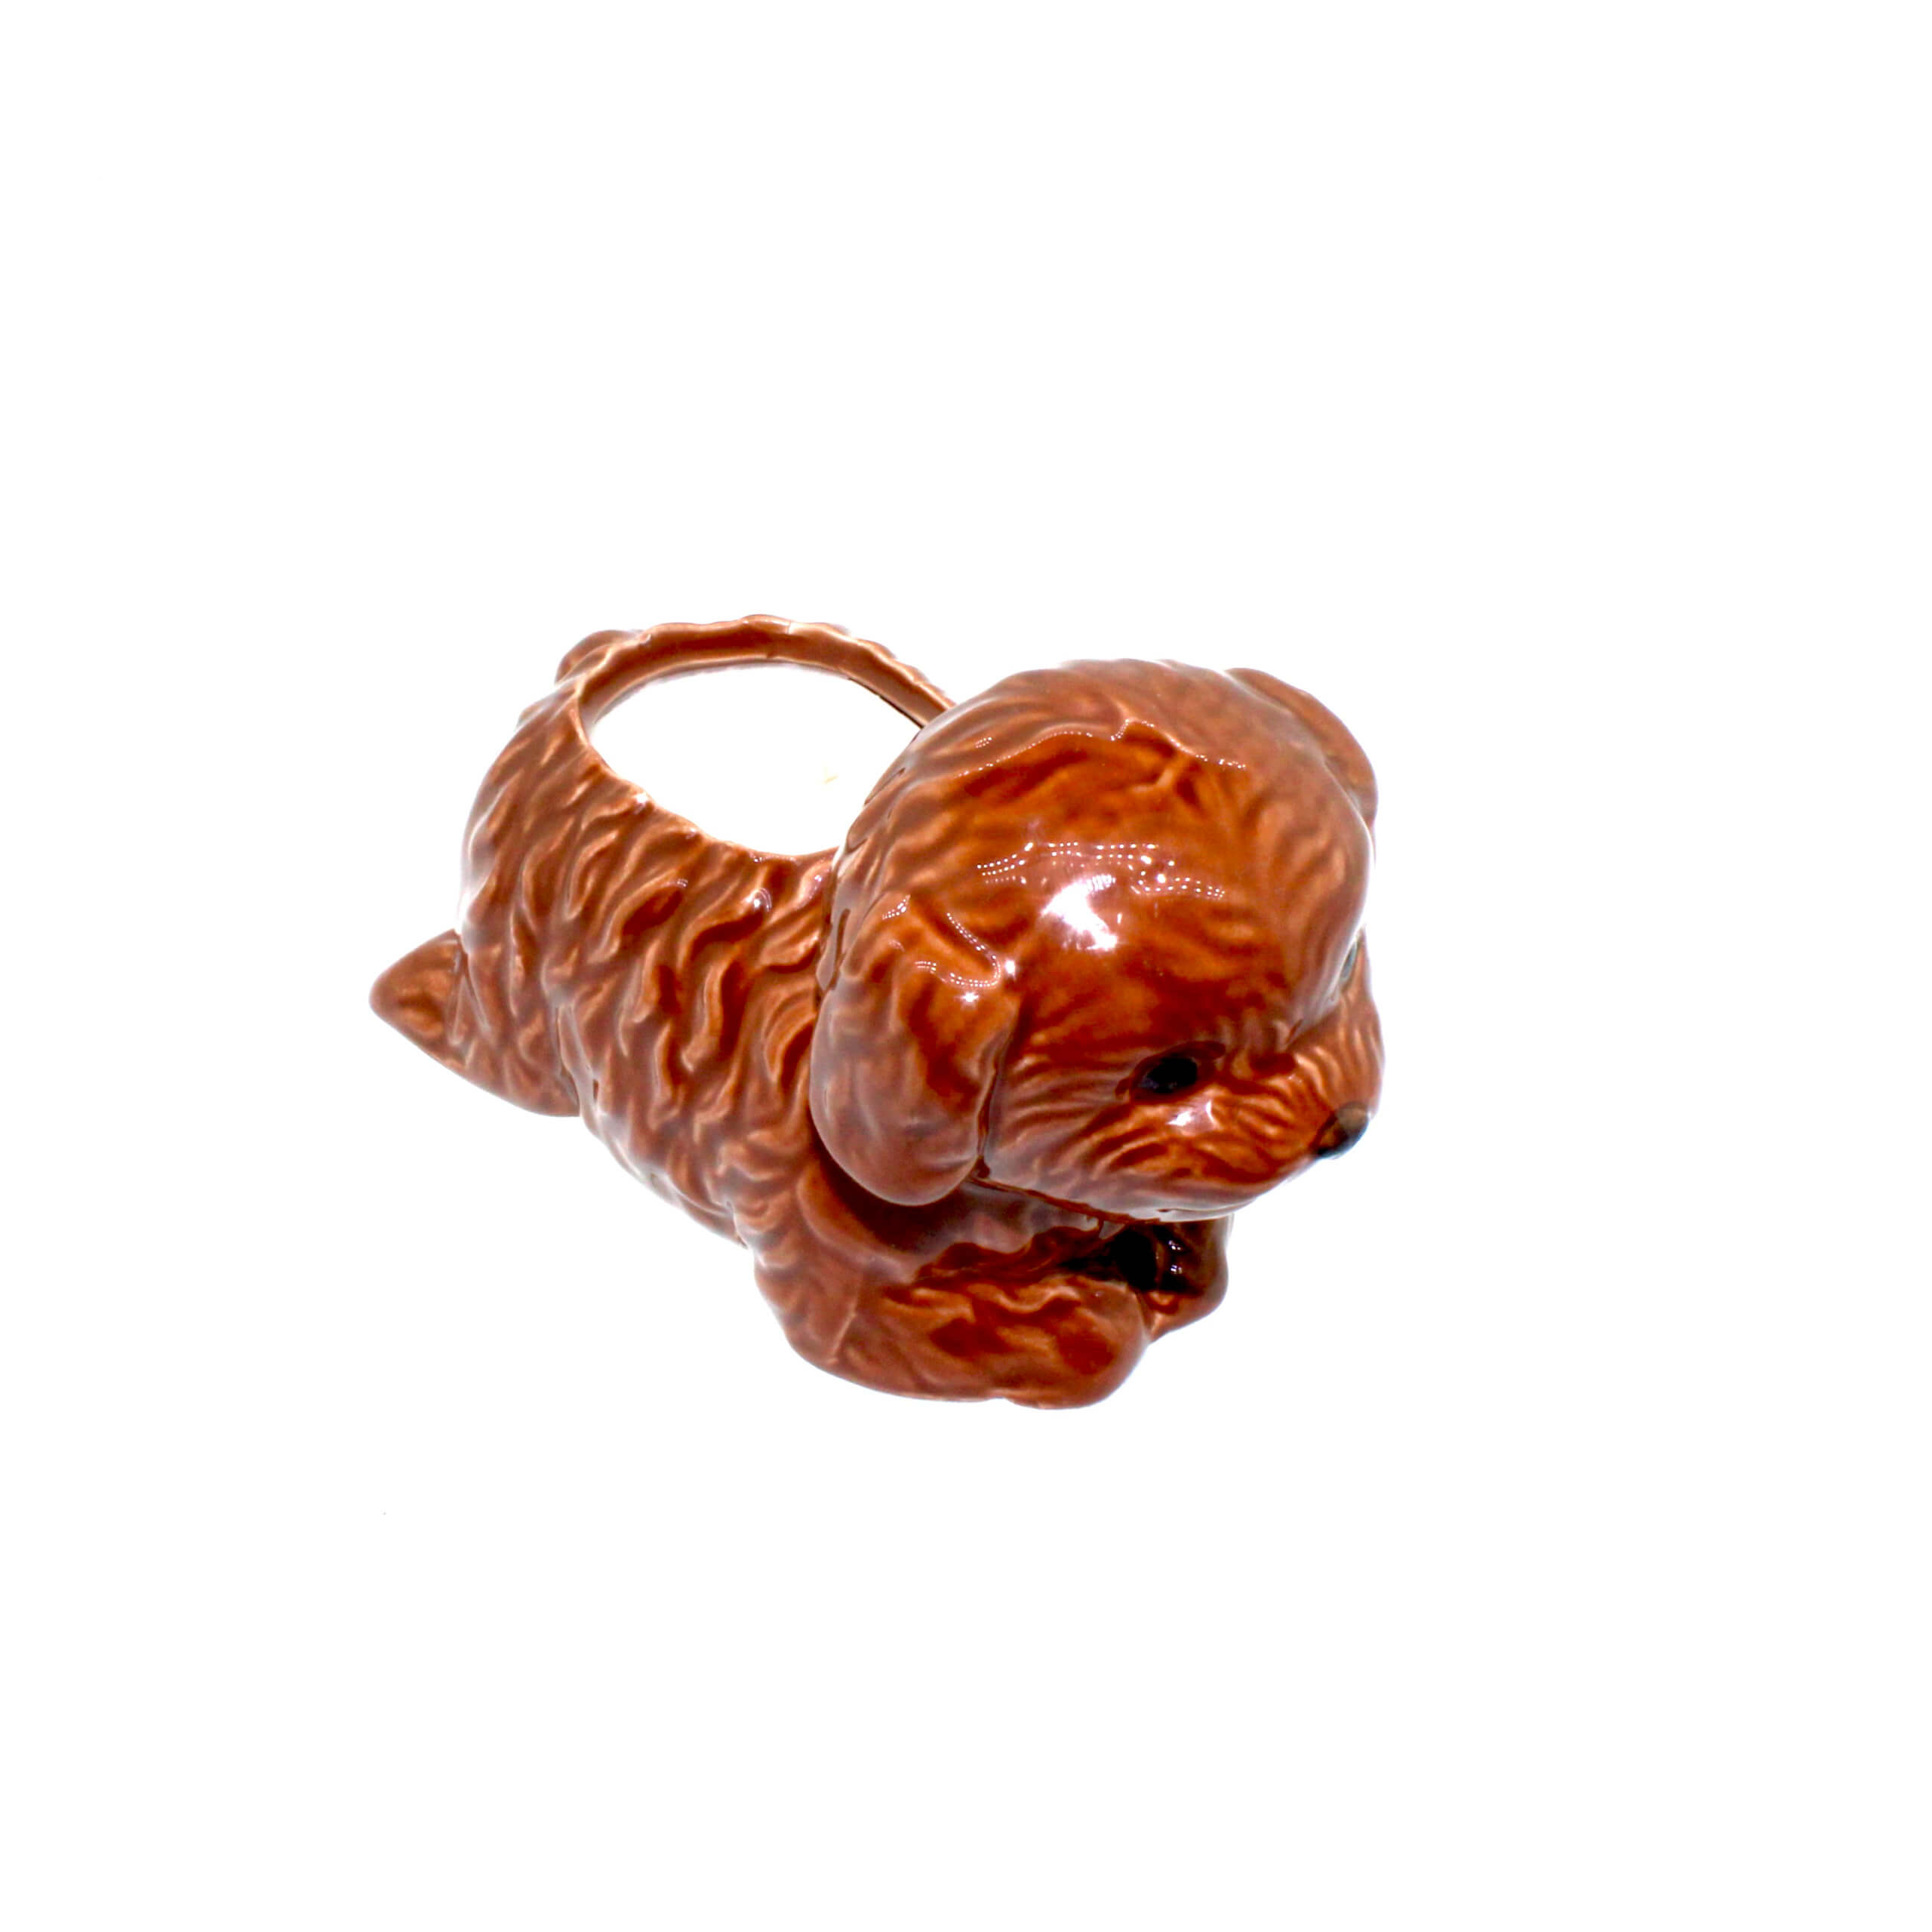 A Brown Puppy Candle holder side view with the dog pointing to the right